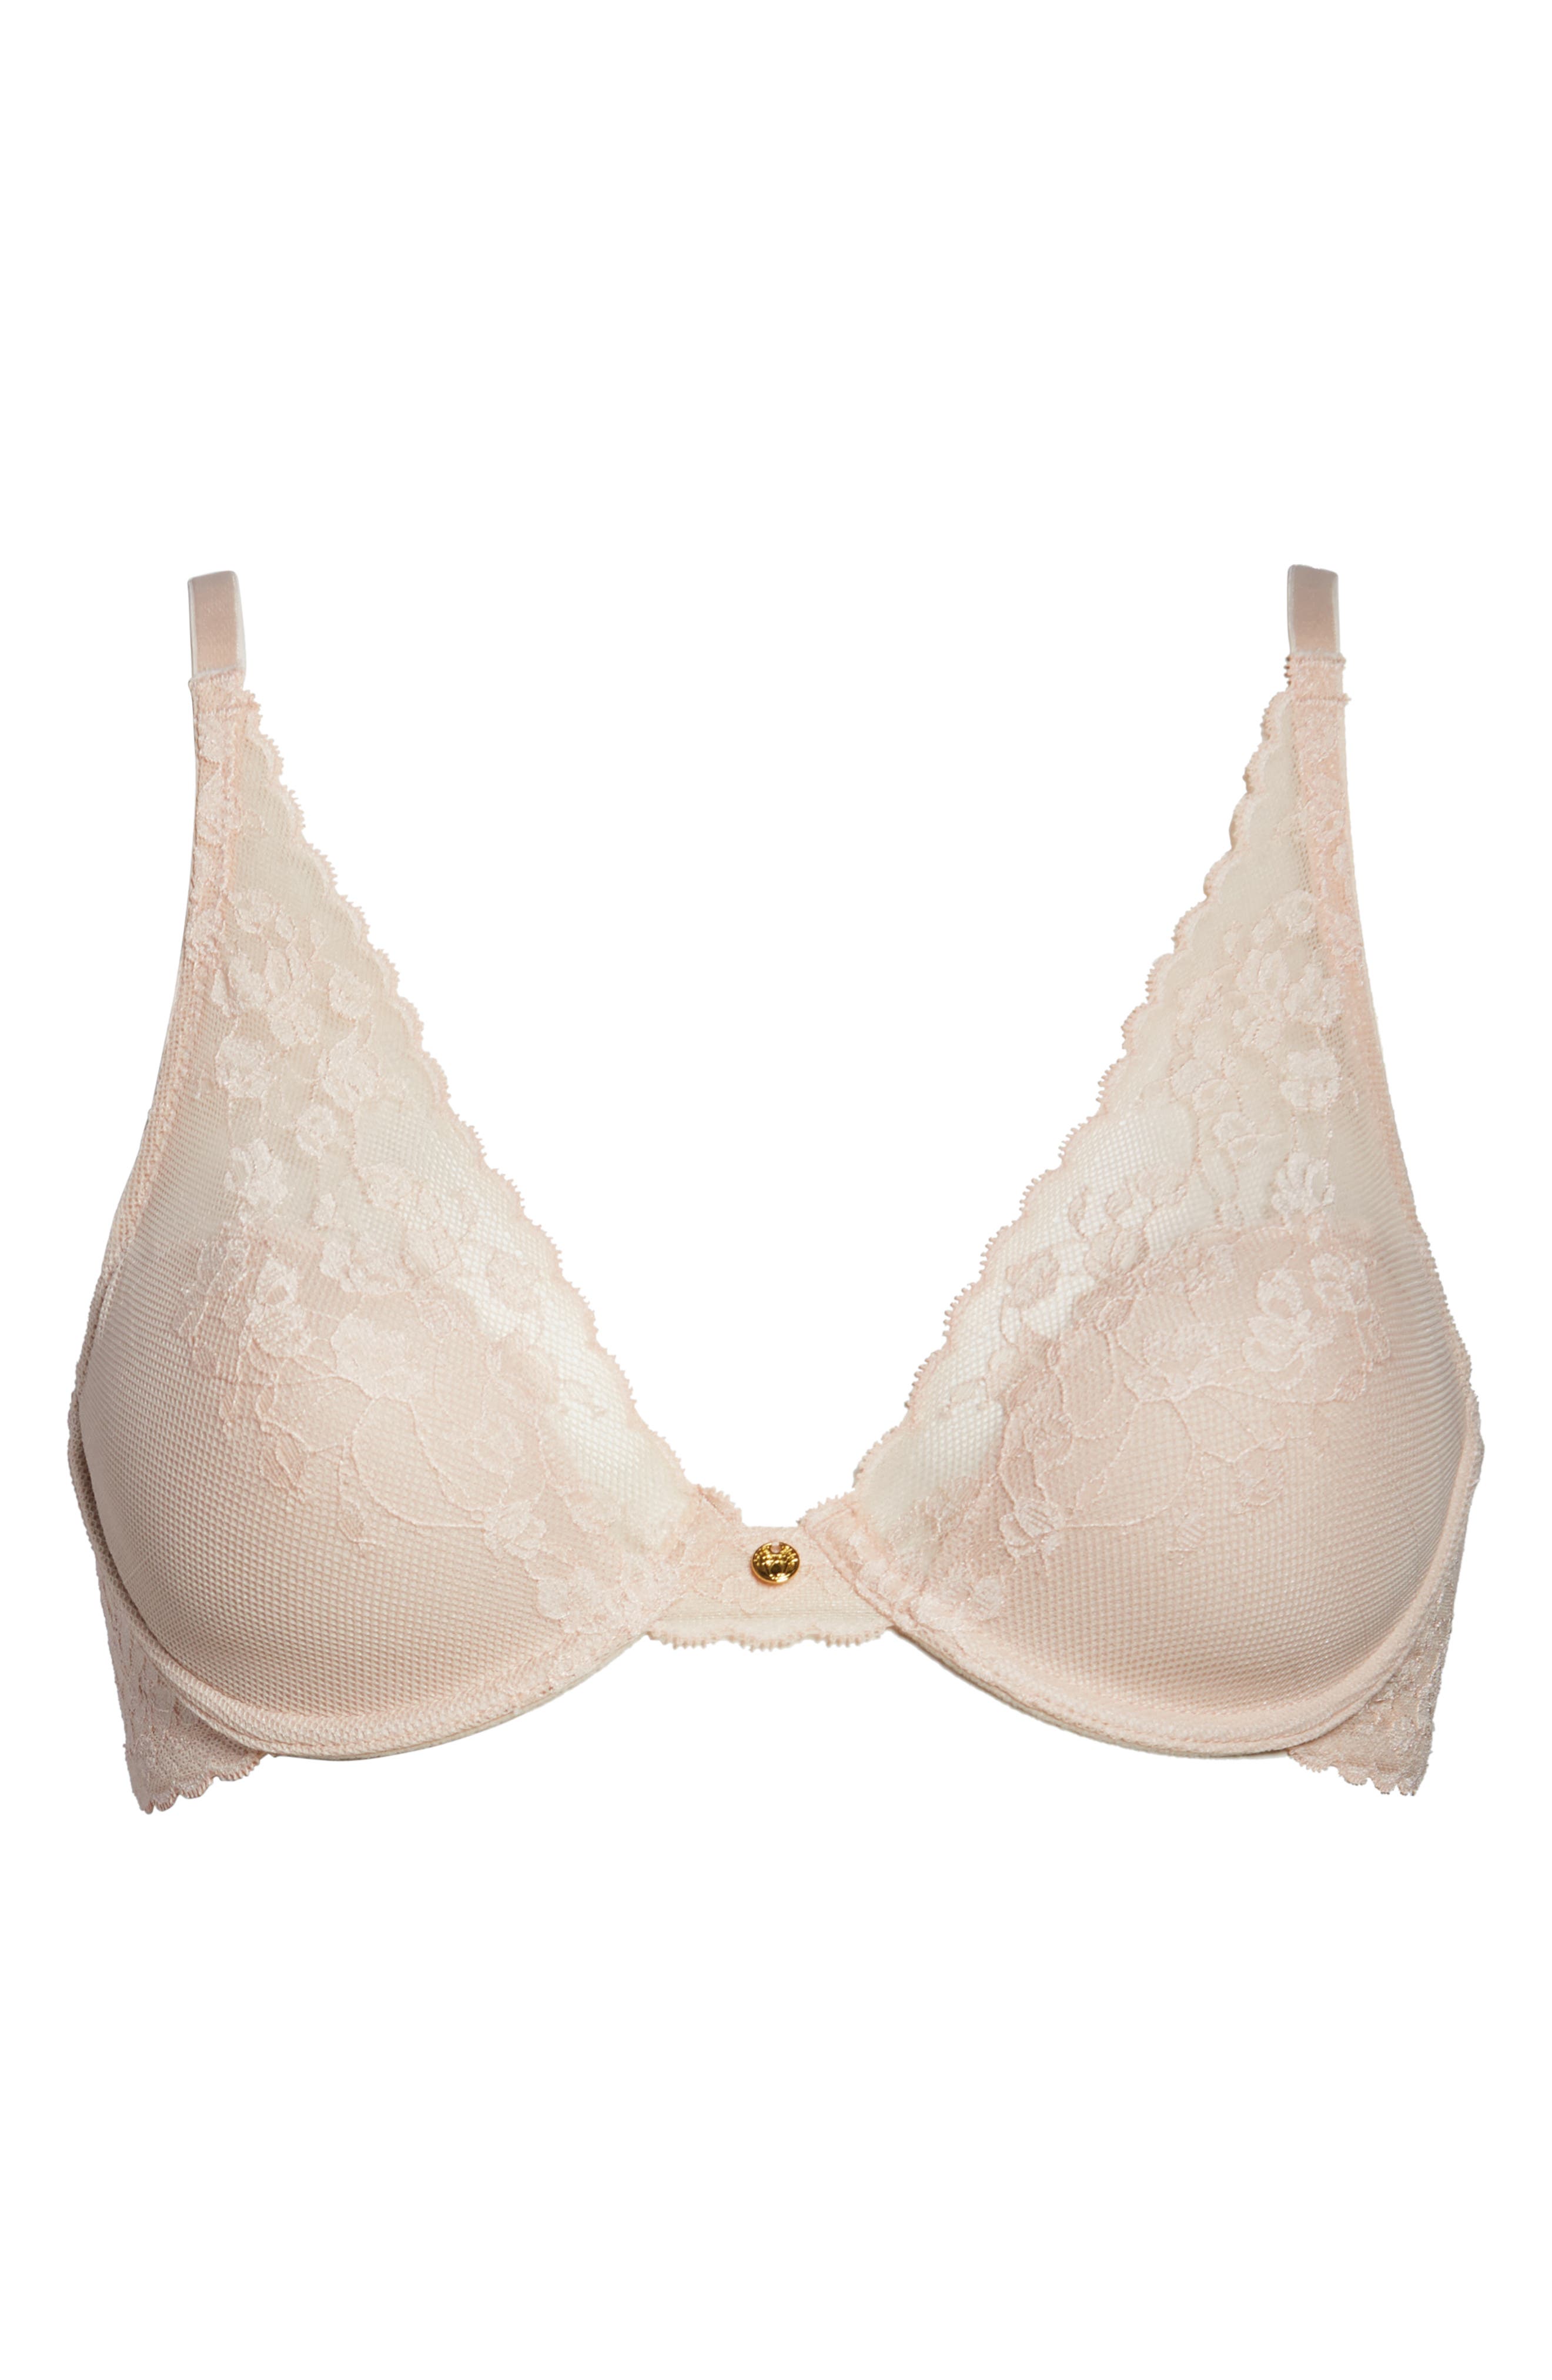 The 7 best affordable bras at the Nordstrom Anniversary Sale